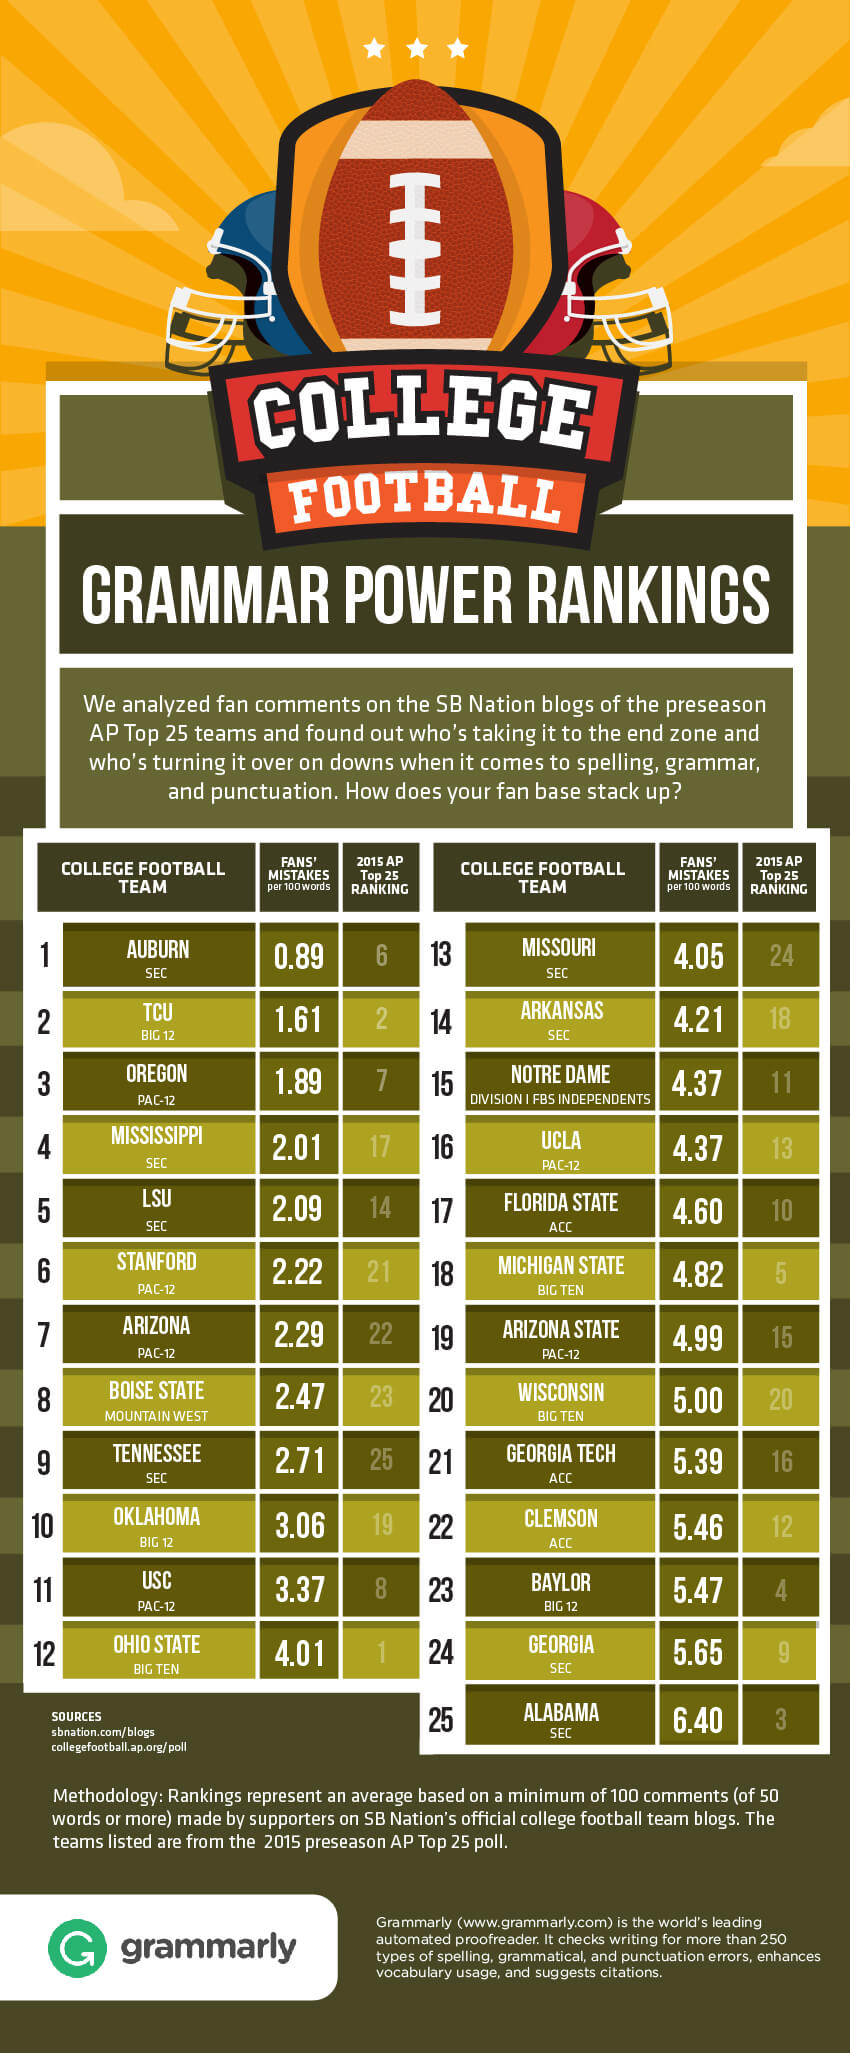 College Football Ranking by Grammarly's Plagiarism Checker